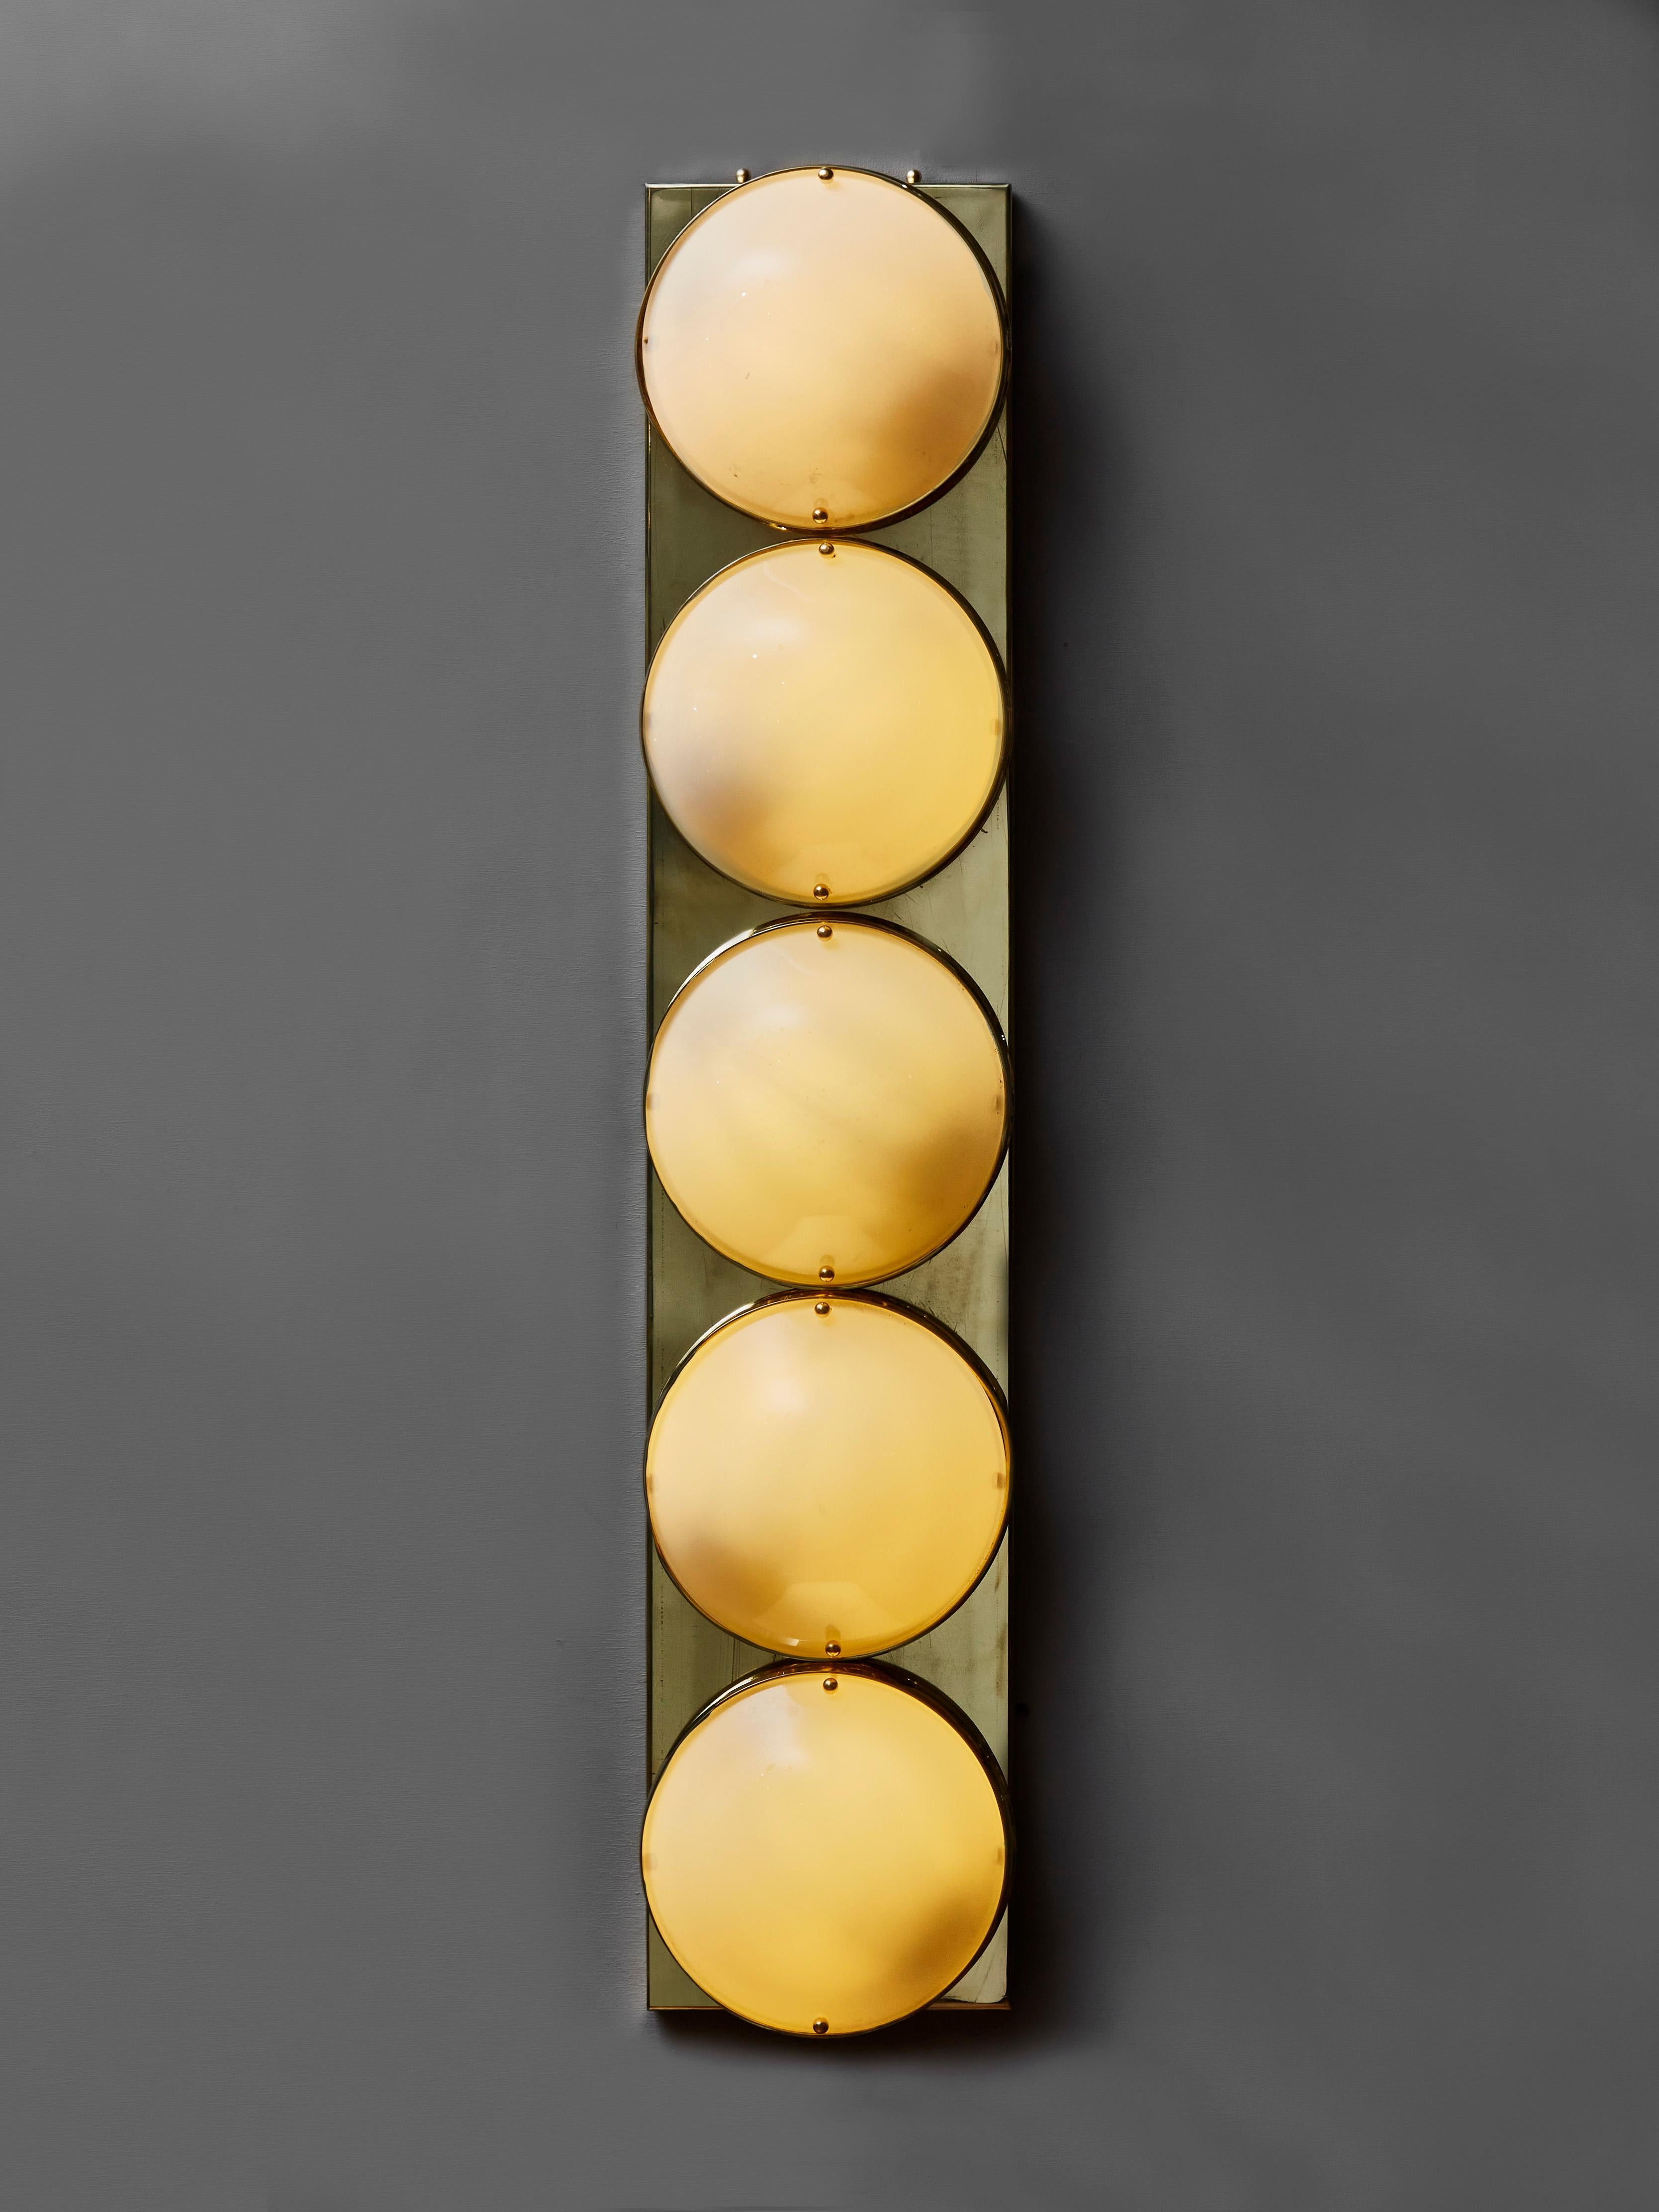 Elegant pair of long wall sconces in brass and opaline glass globes. 5 light bulbs.
Creation by Studio Glustin.
France, 2021.